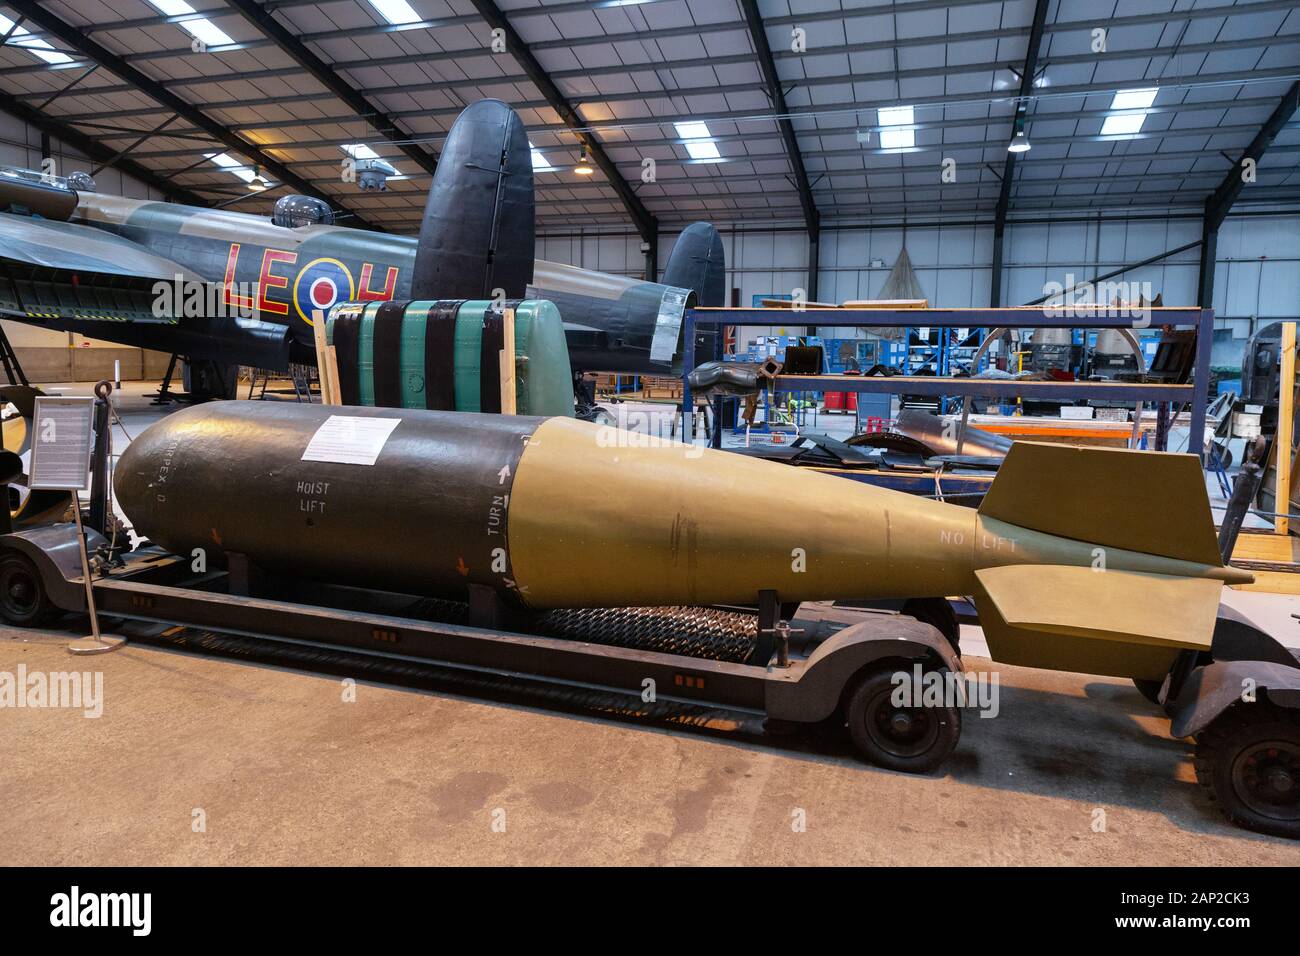 World war 2 bomb; A 12000 lb Tallboy bomb carried by Lancaster bombers, in the Lincolnshire Aviation Heritage Centre, East Kirkby Lincolnshire UK Stock Photo